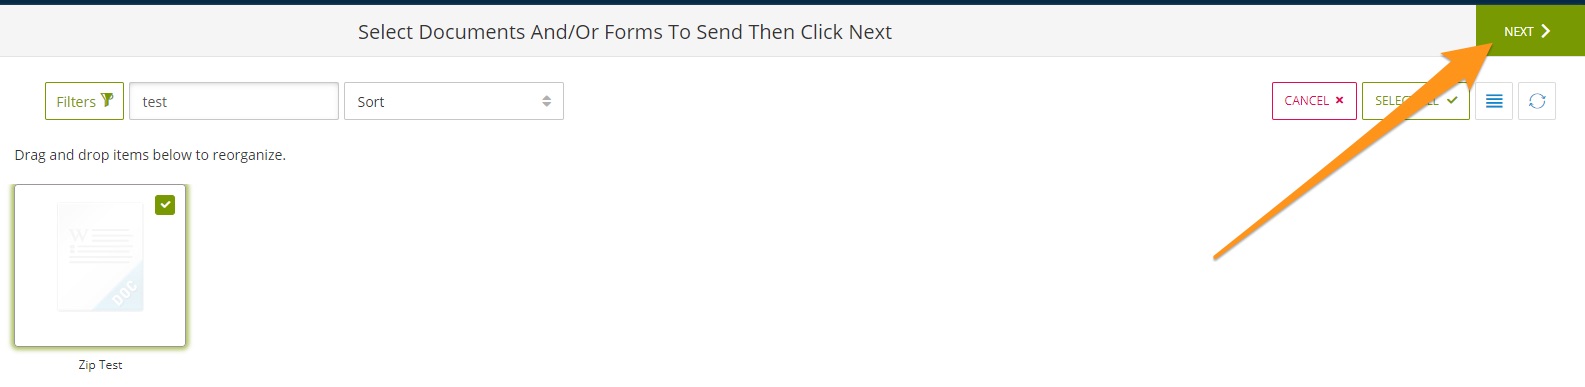 Step_5_-_Once_a_document_is_checked__click_the_next_button_in_the_upper_right_hand_corner.jpg